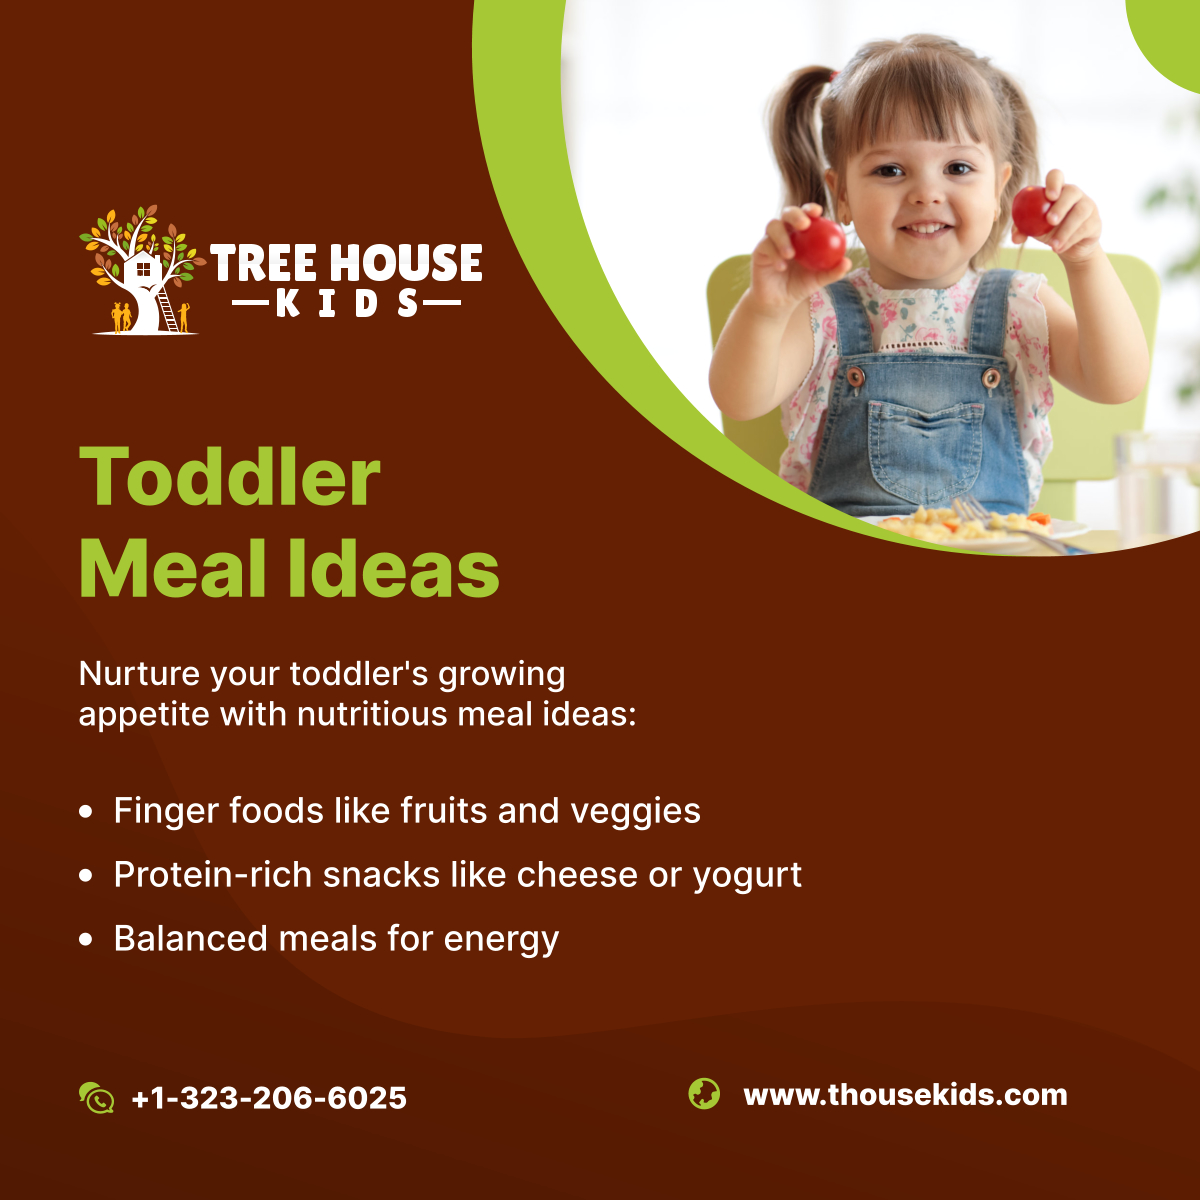 Keep your toddler's tummy happy with these nutritious meal ideas! Try them out today for a happy, healthy child! 

#LosAngelesCA #Childcare #HealthyMeals